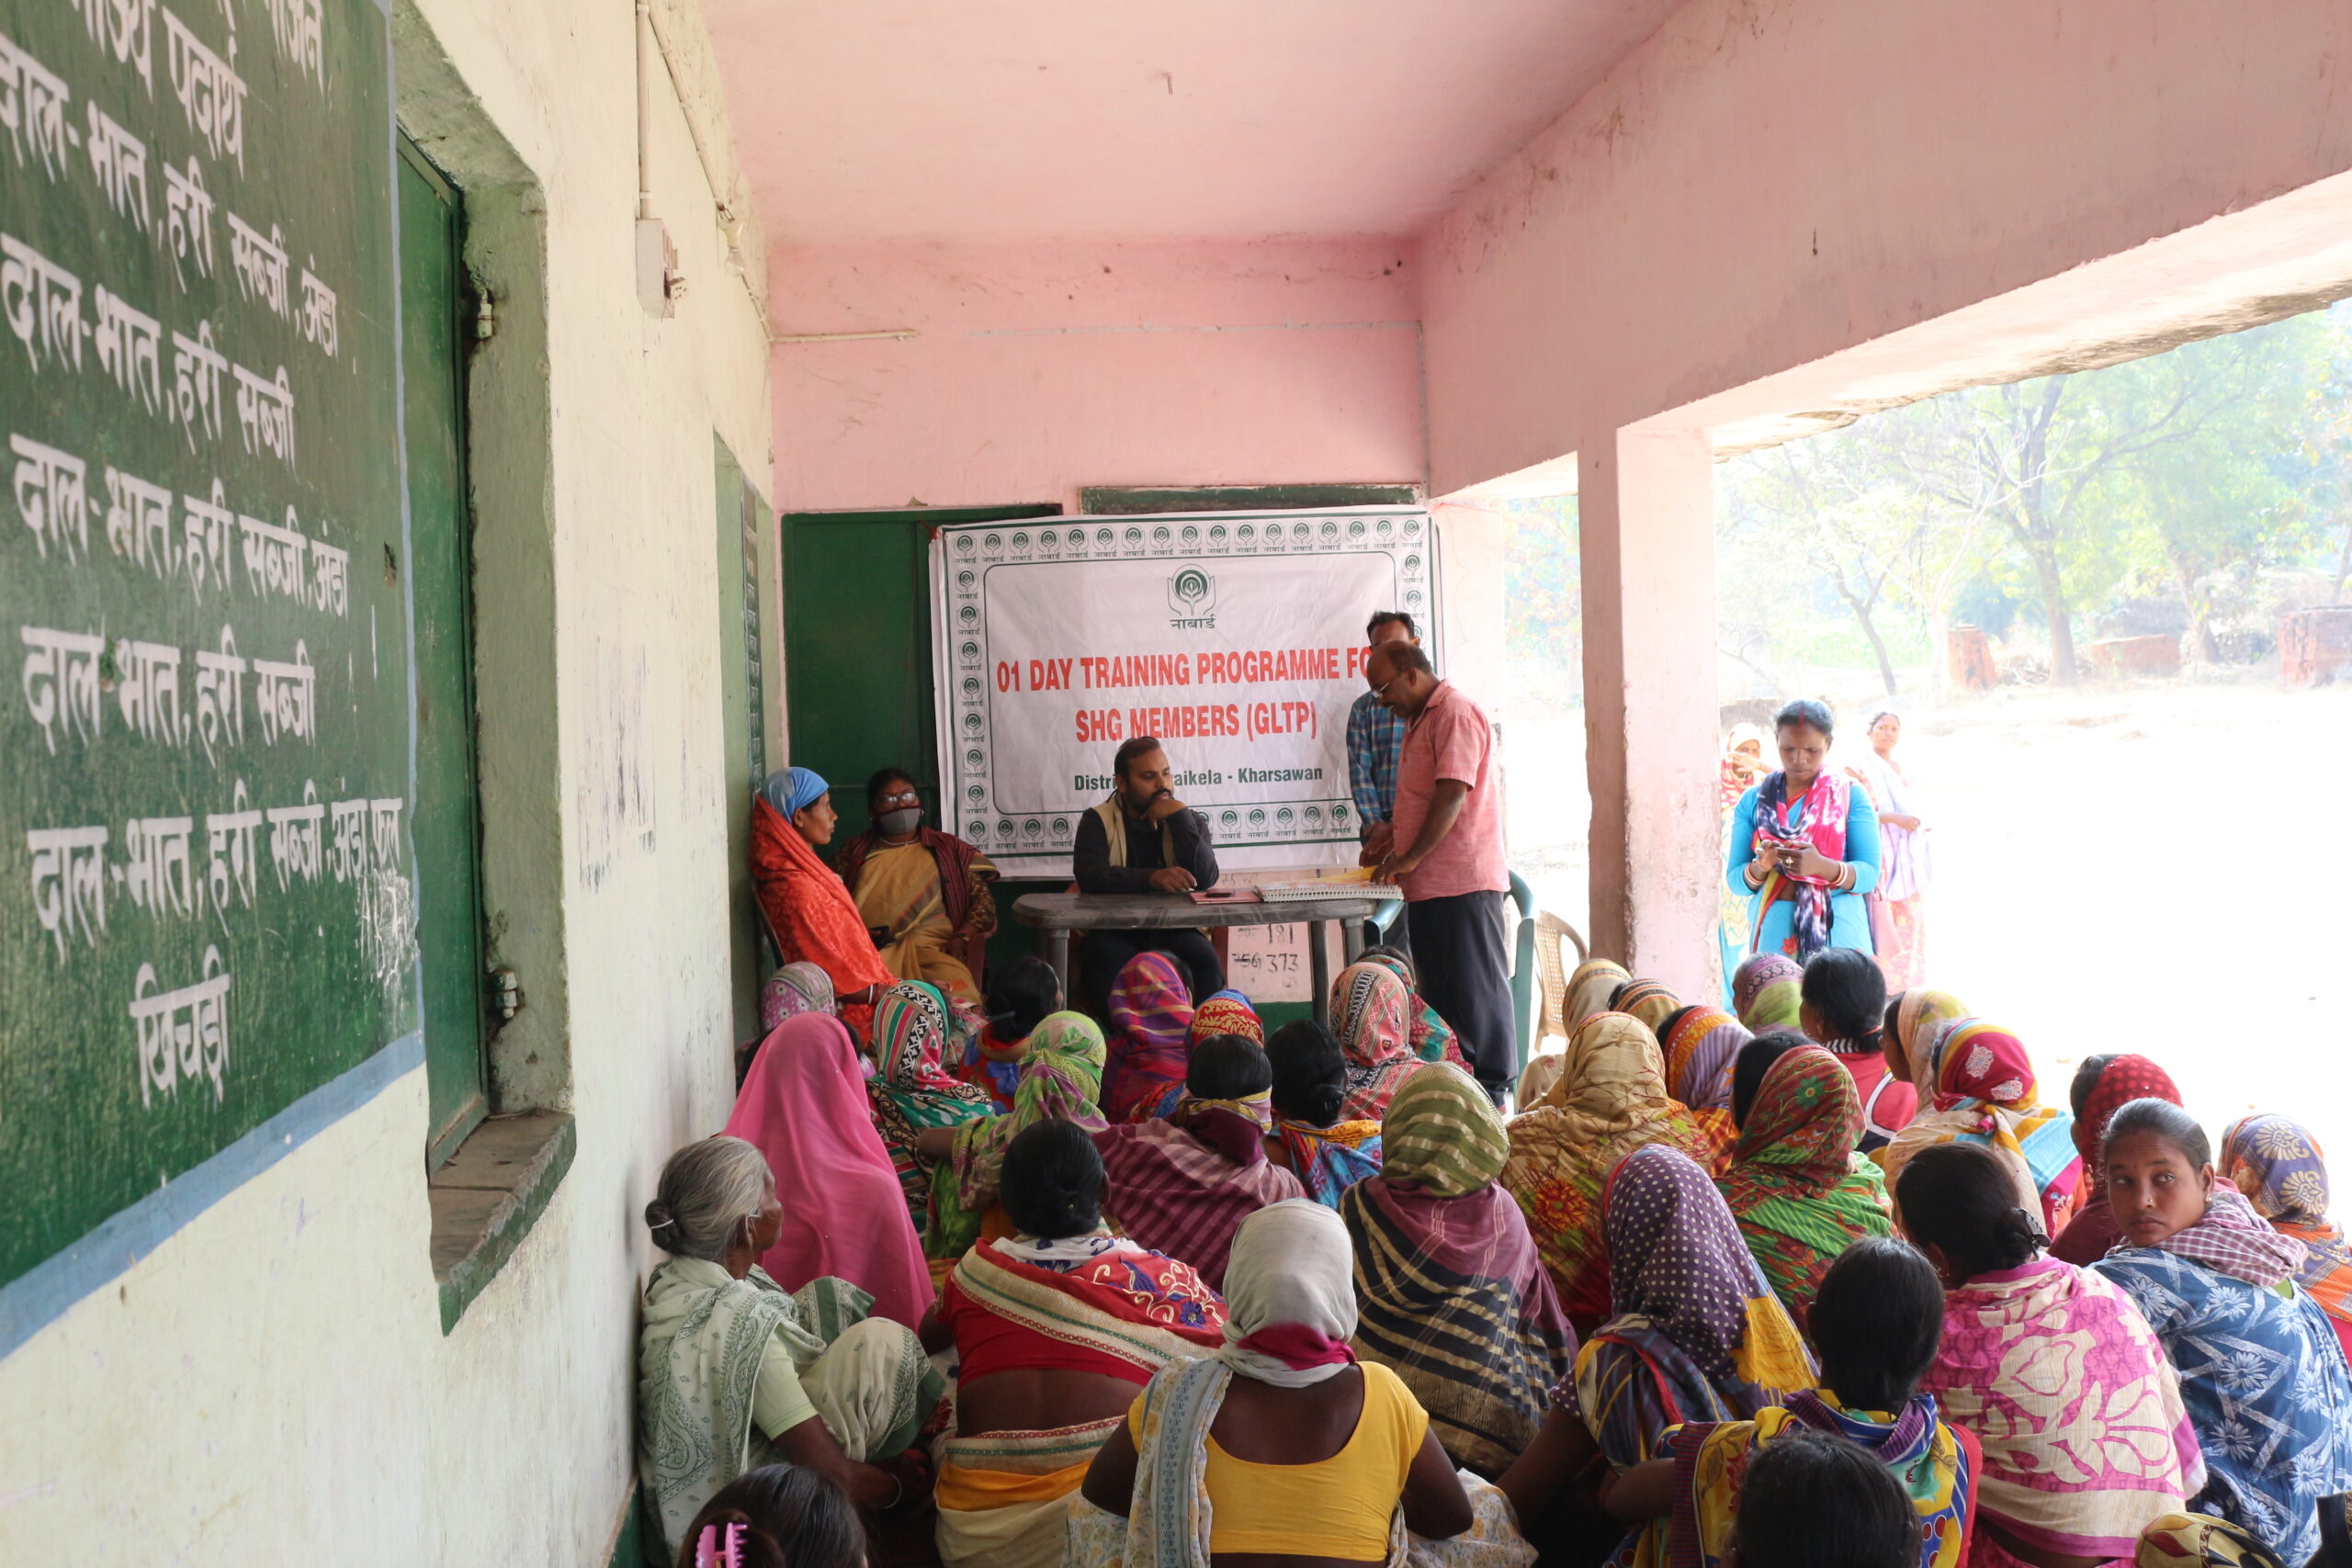 Income Based 01 Day training programme for SHG members in Kalajharna, Rajnagar on 10th January 2021.